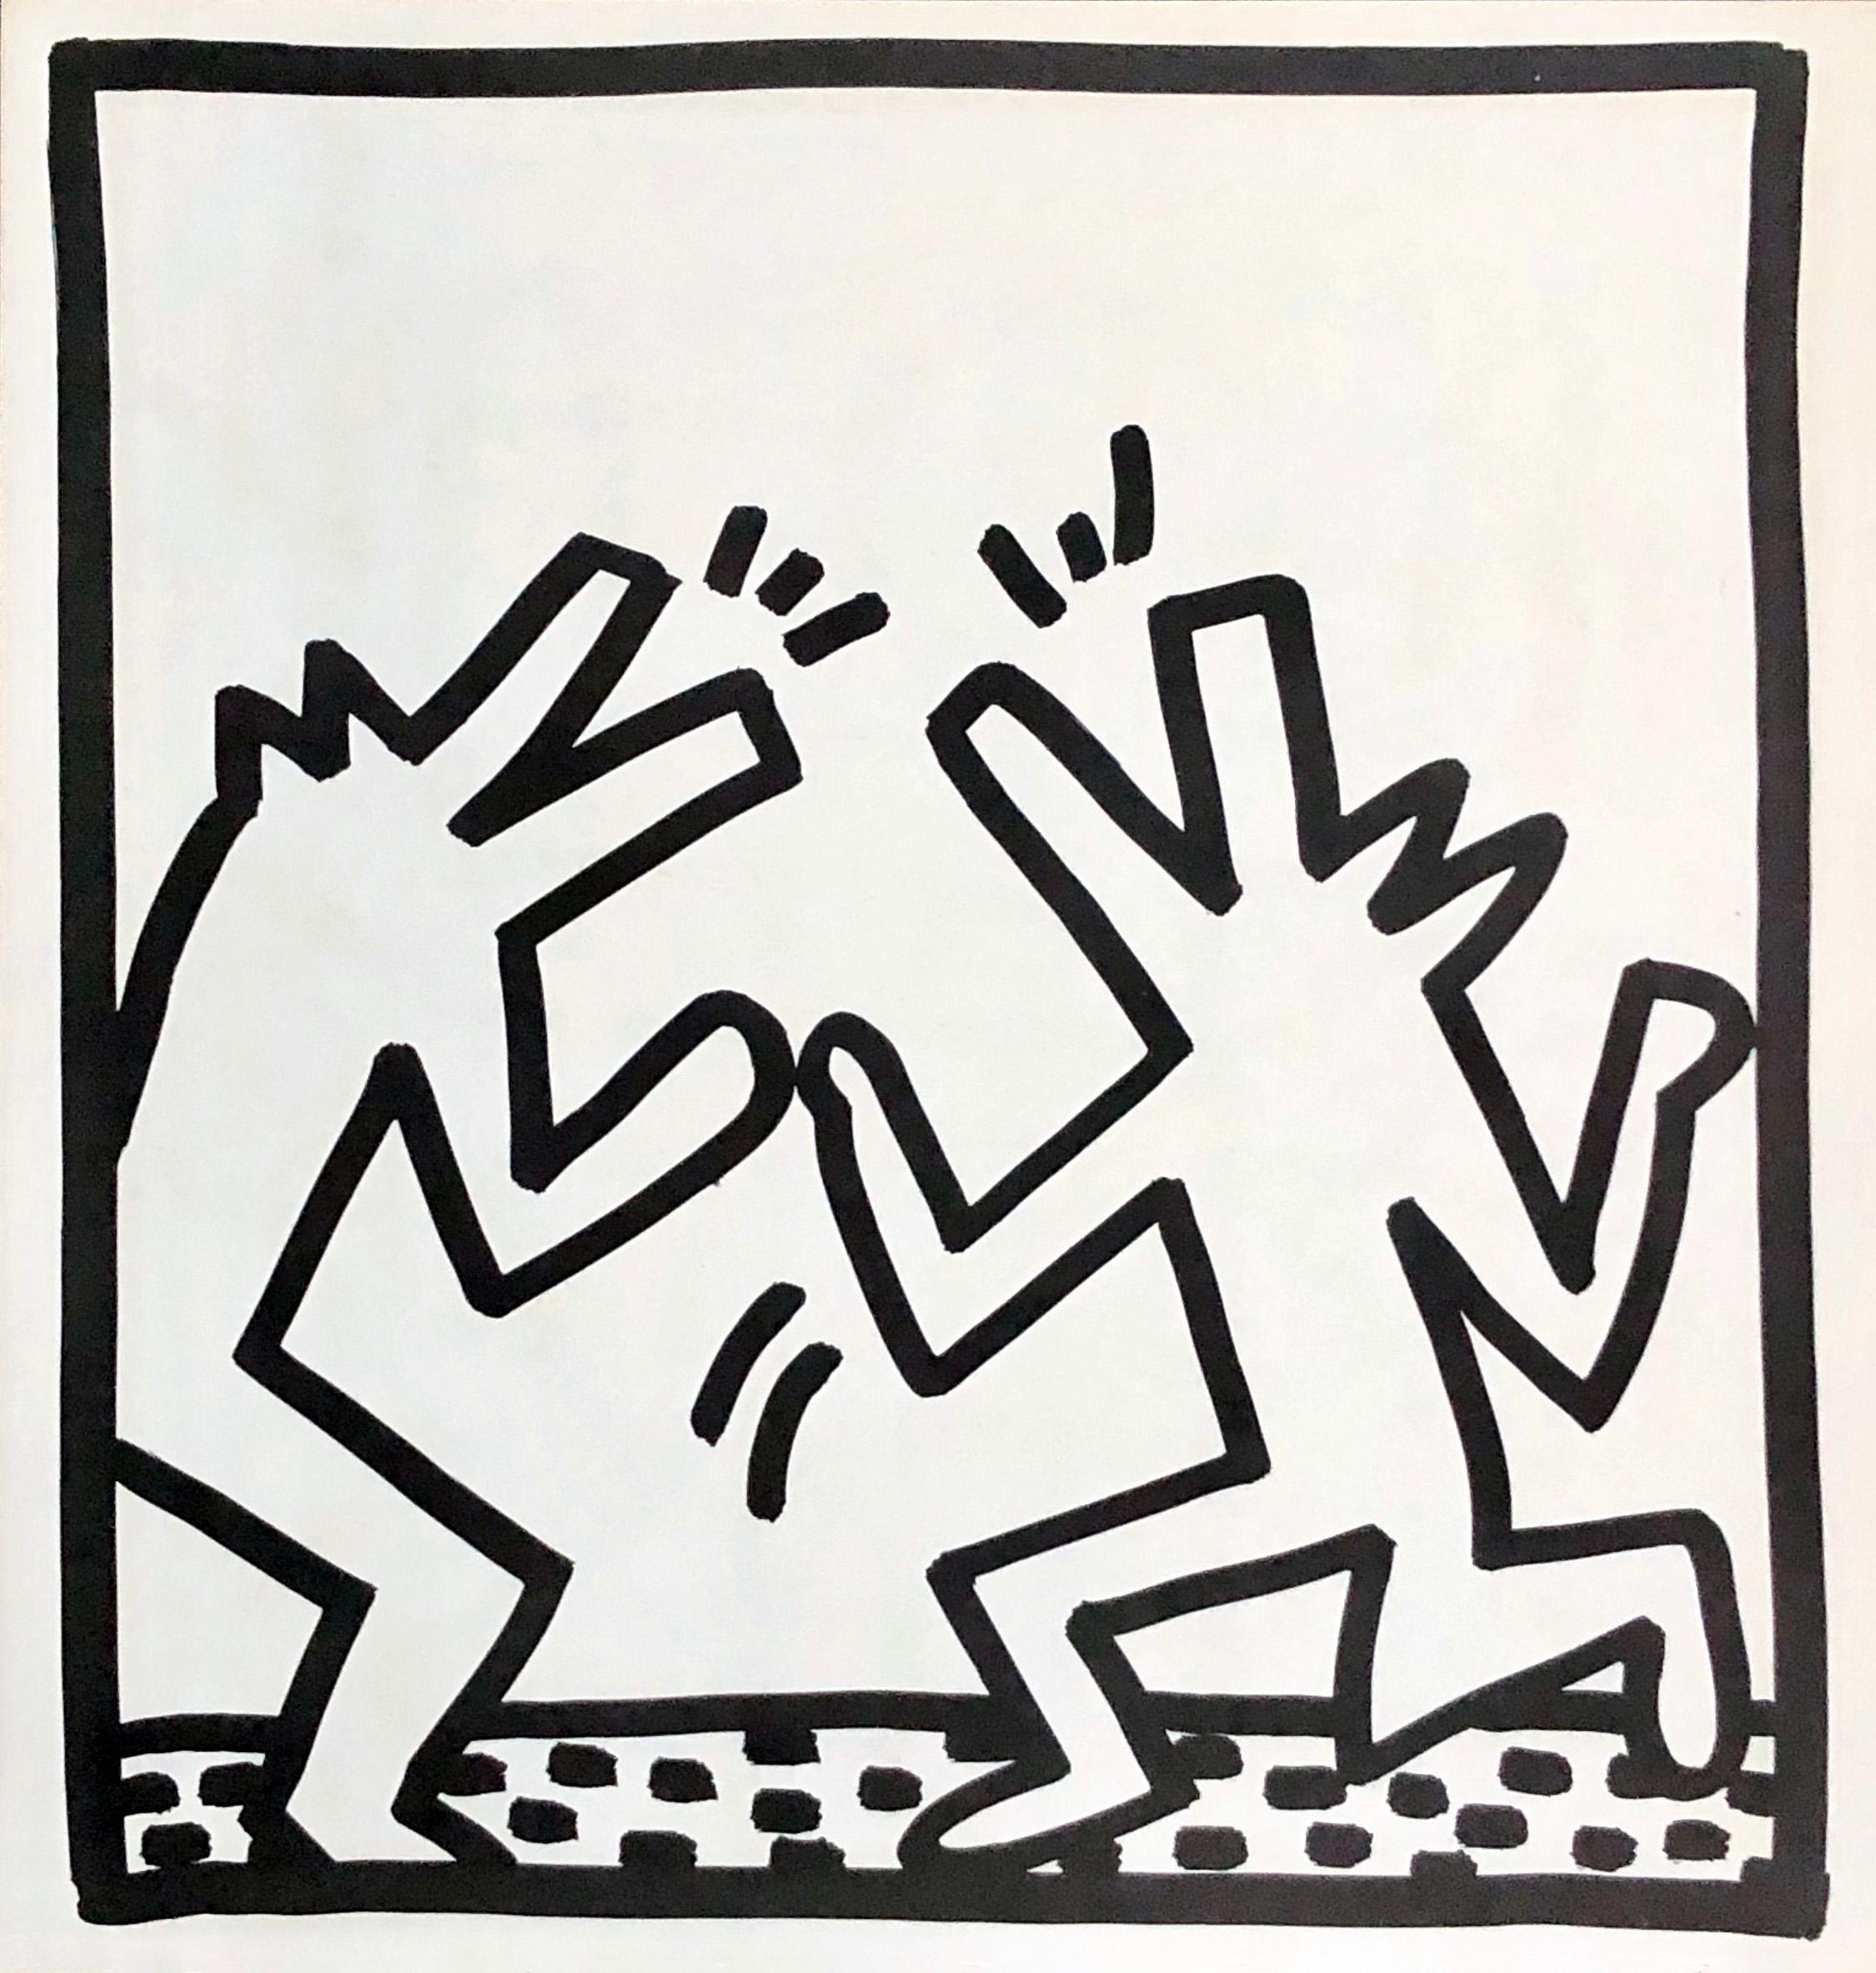 (after) Keith Haring Figurative Print - Keith Haring (untitled) Crocodiles lithograph 1982 (Keith Haring prints) 